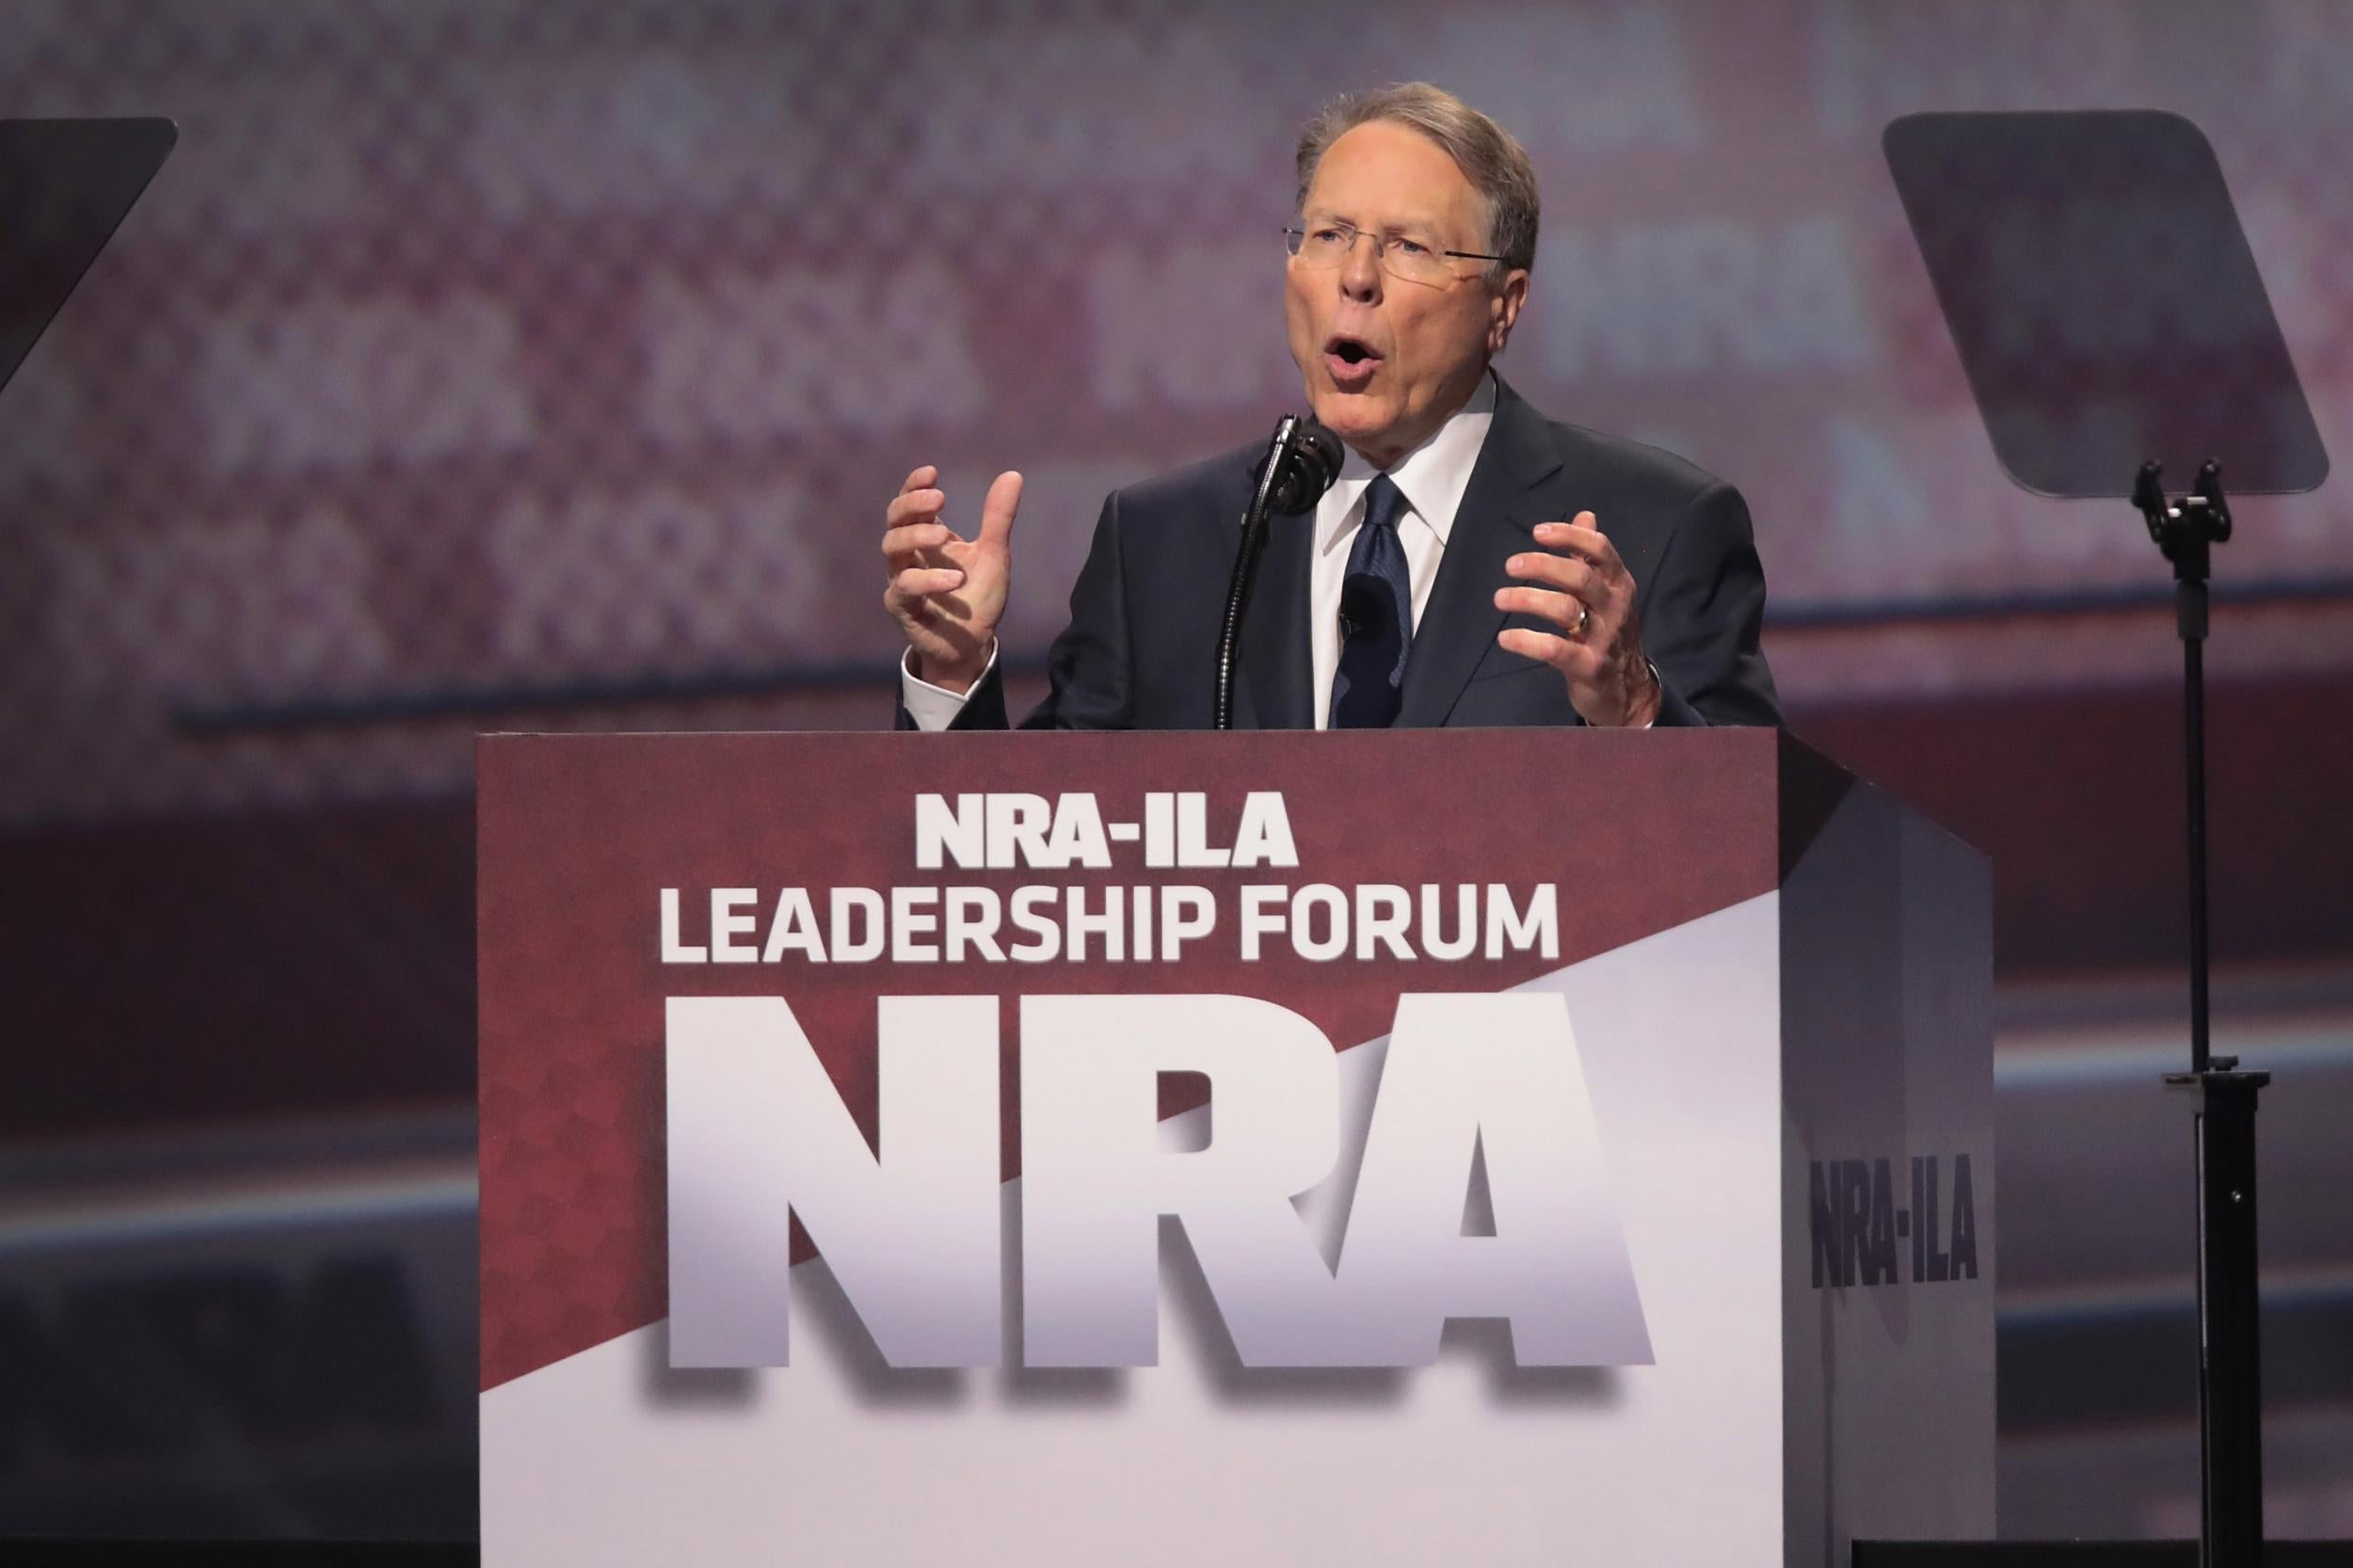 Wayne LaPierre, executive vice president and CEO of the NRA. Trump said the NRA are 'great people'